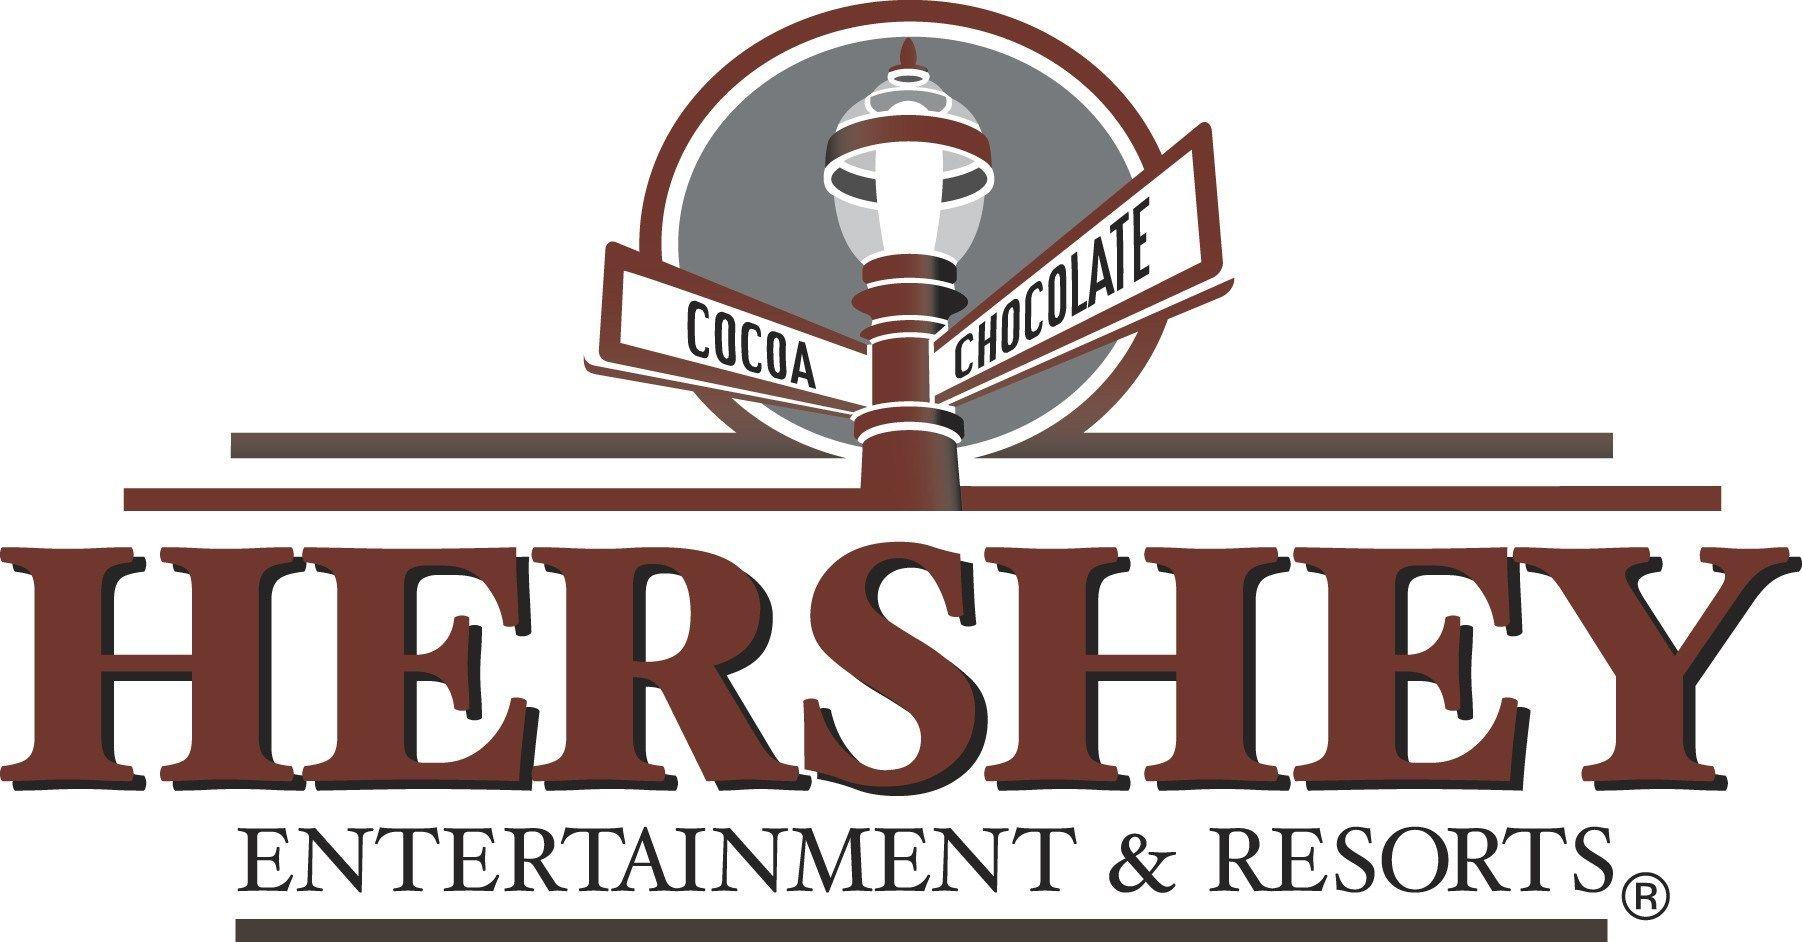 Hersheypark Logo - Hersheypark to provide rides, treats and relief « Amusement Today